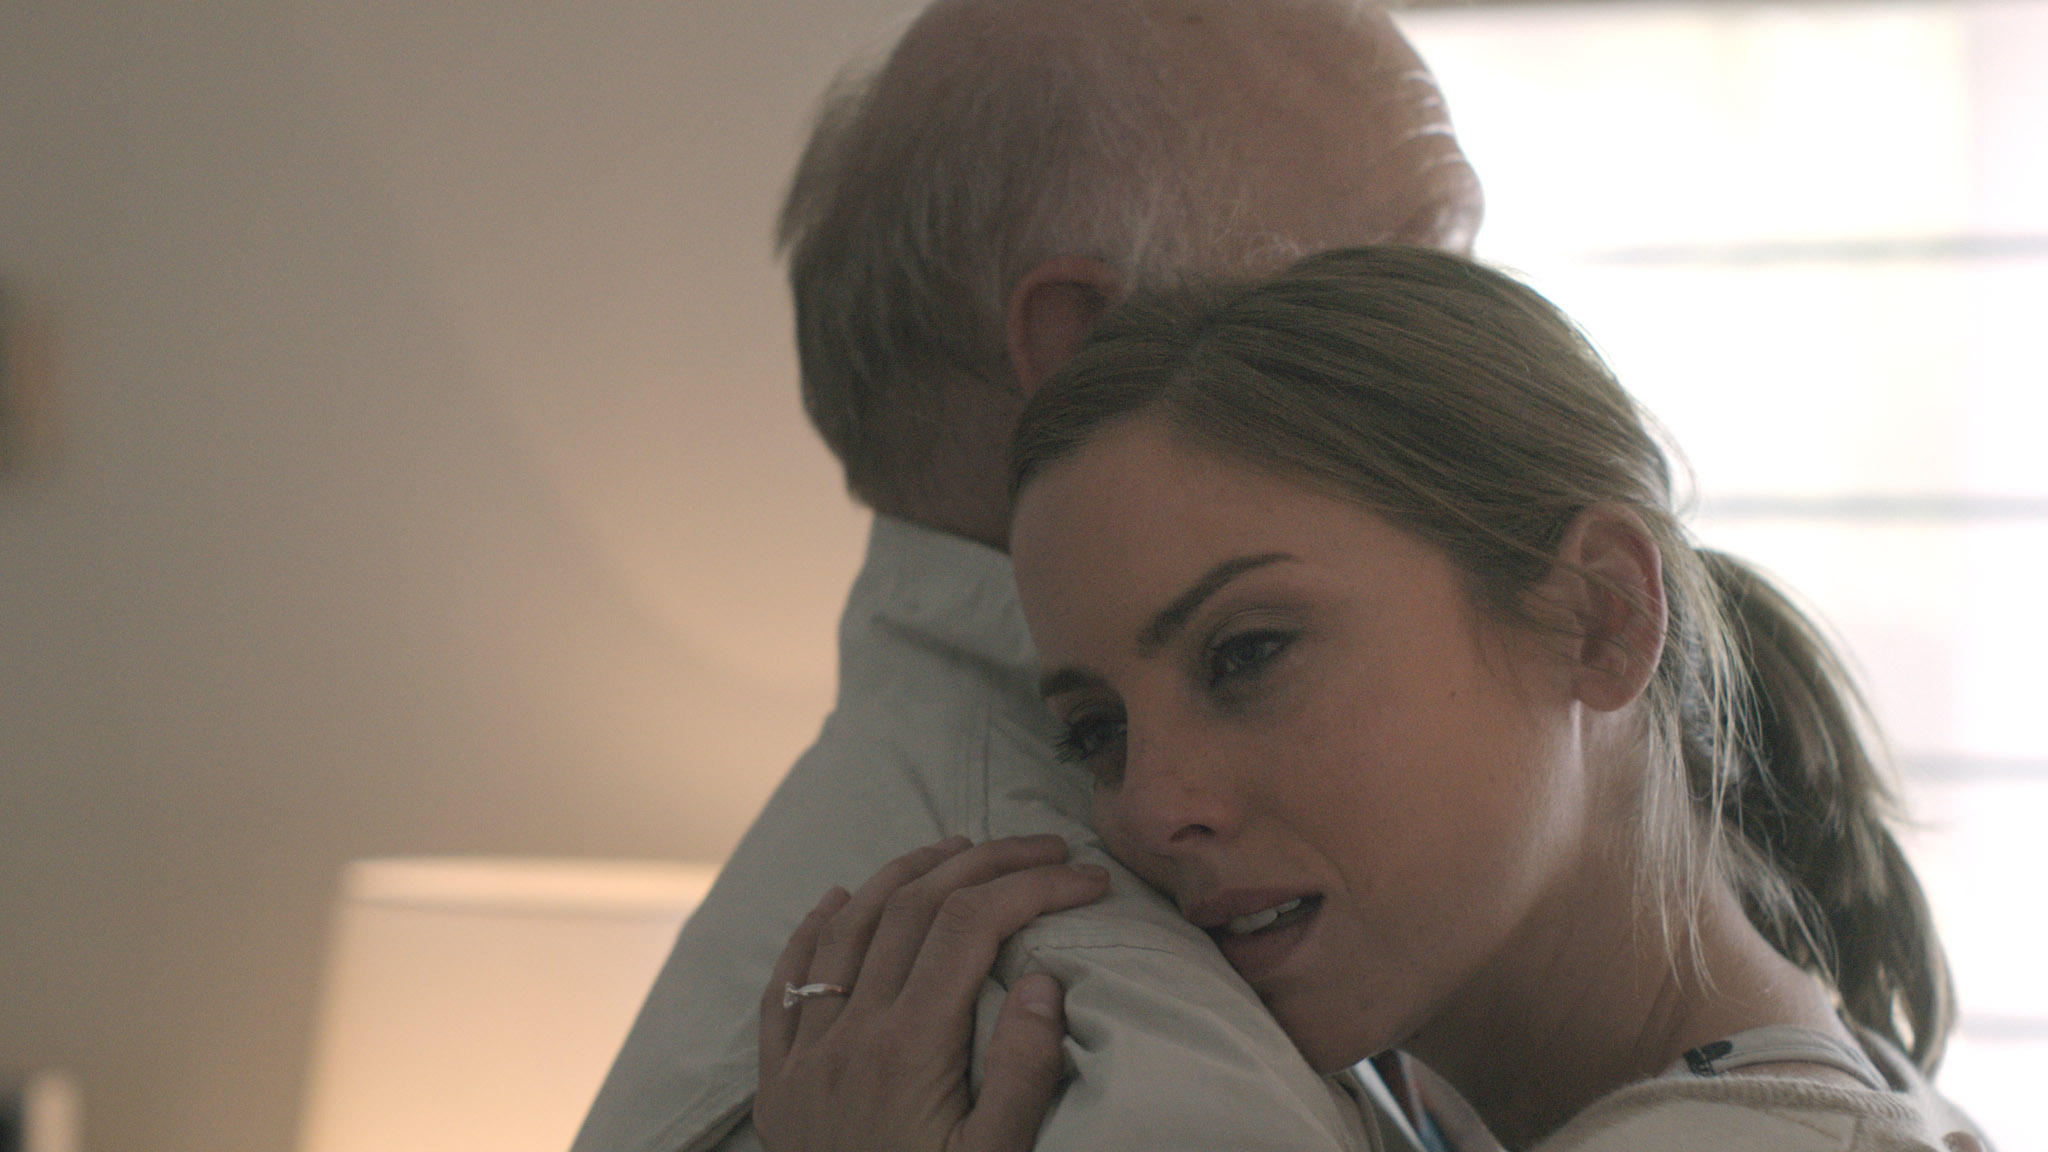 Alice & Joel embrace. Youth, a short film coming in 2016. Starring Jessica Stroup and George Maguire, directed by Brett Marty. A sci-fi film about growing old in a world of perpetual youth.